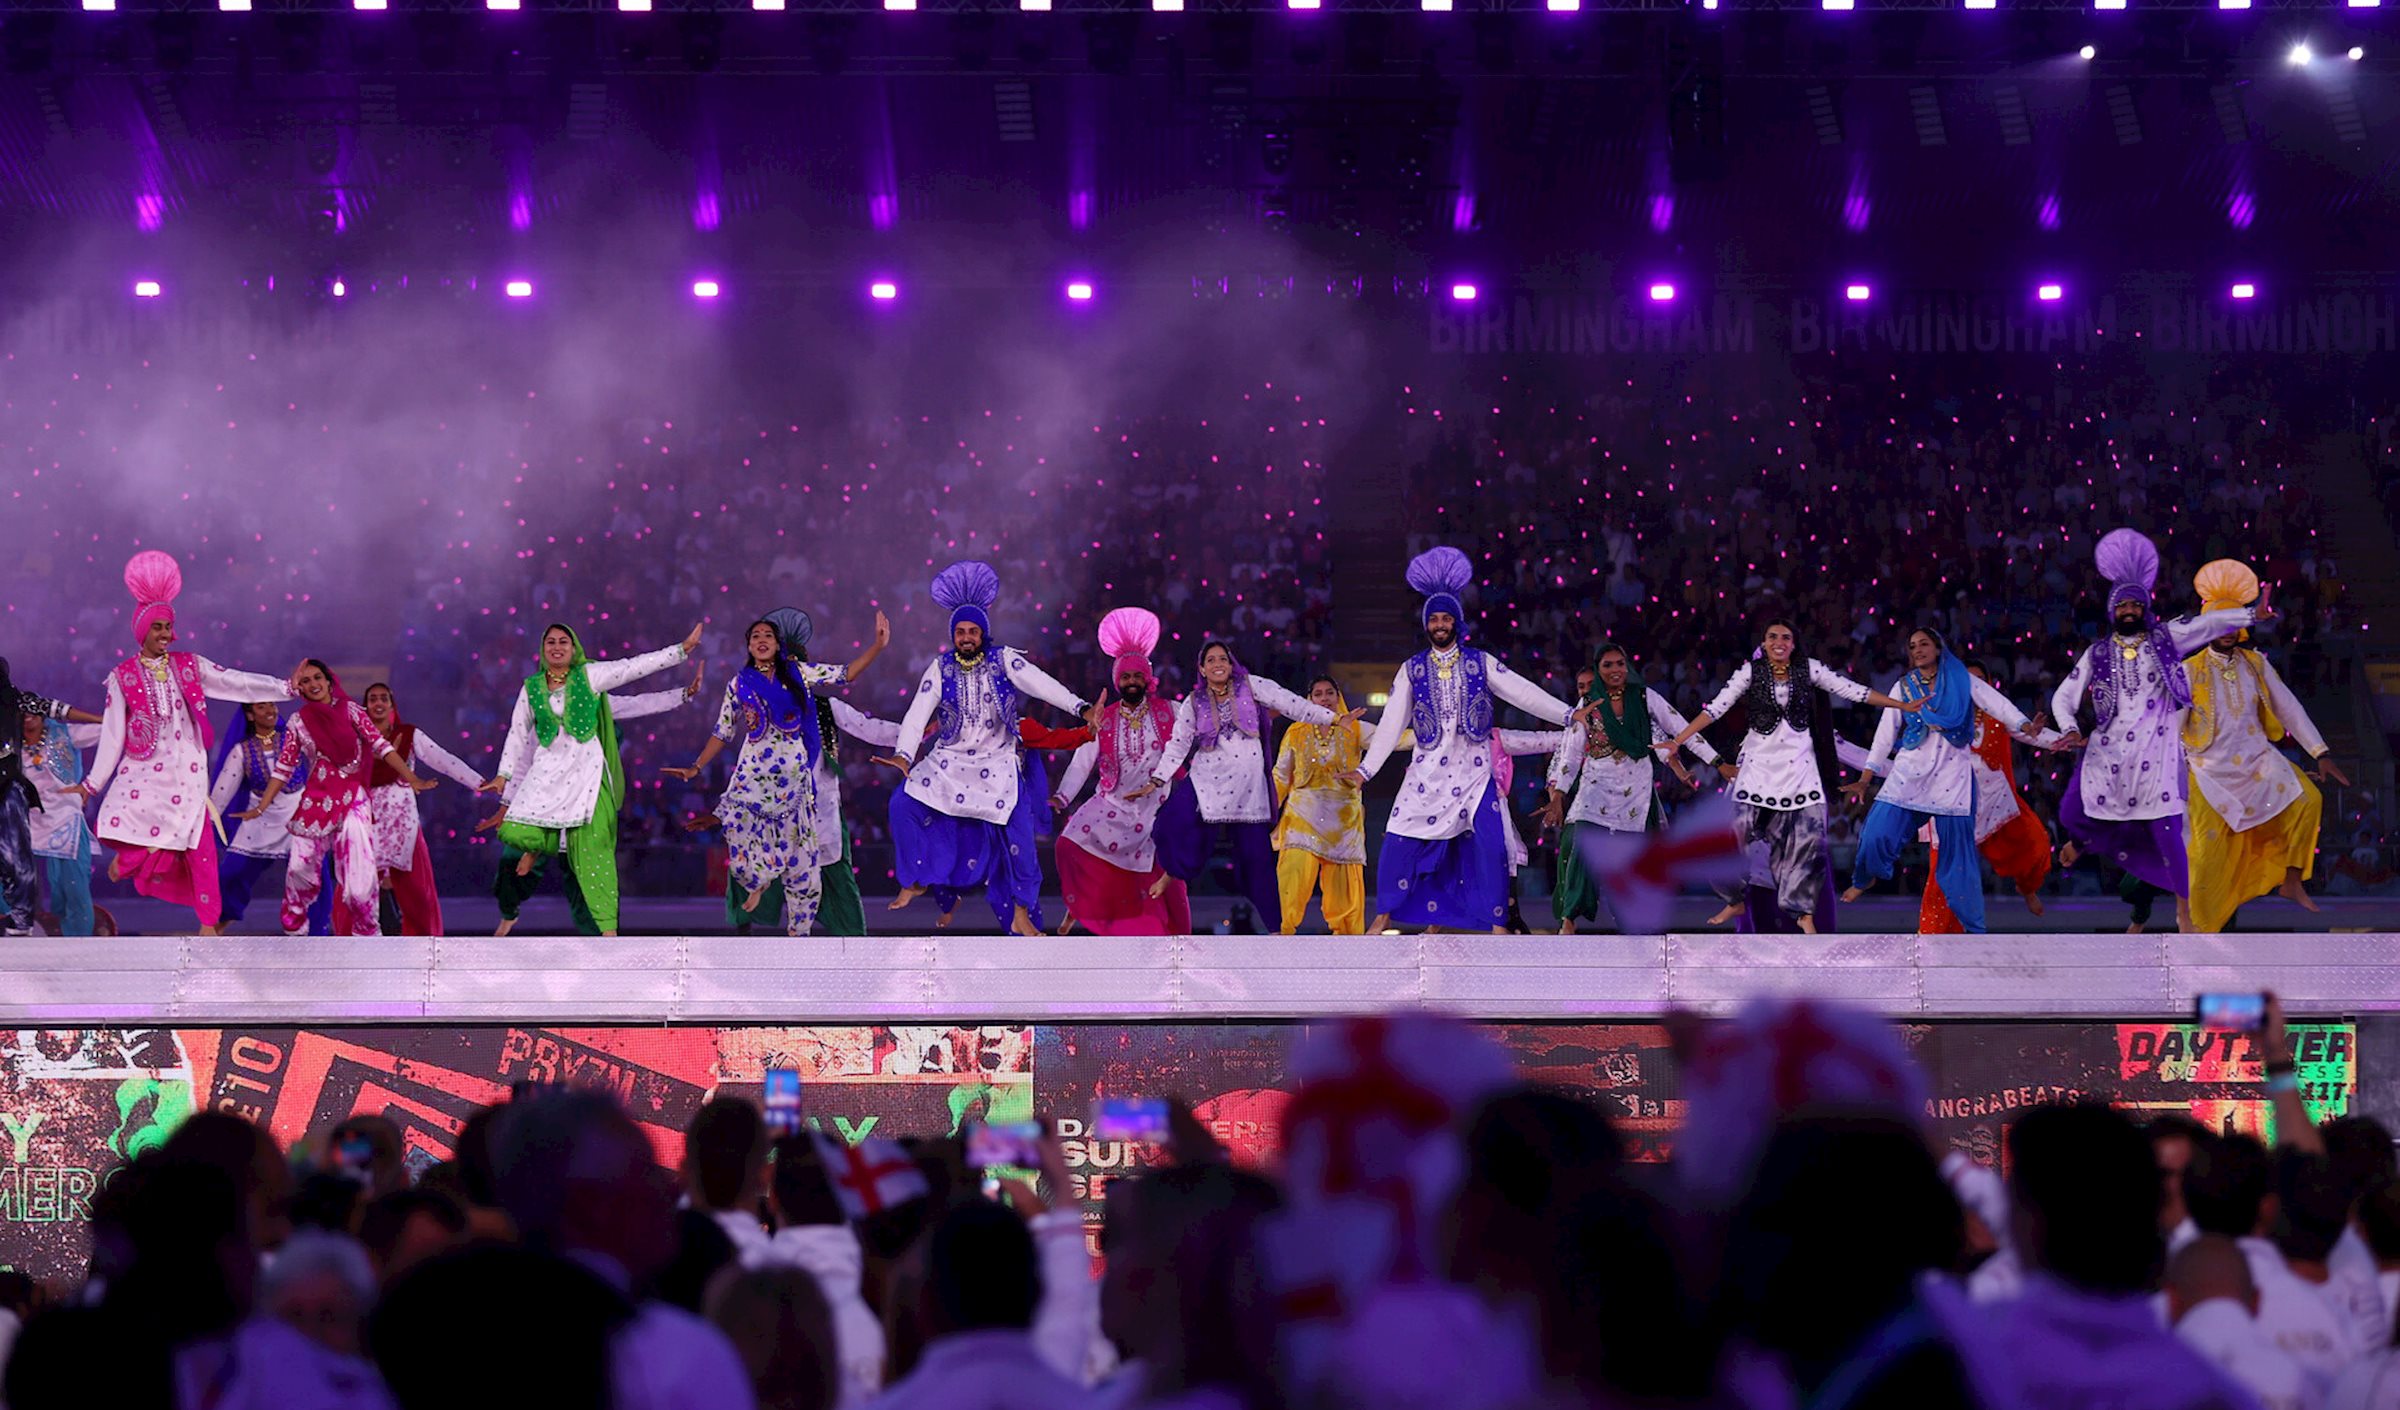 Birmingham Ceremonies chooses PRG to supply lighting and rehearsal space for colourful and historic Opening and Closing Ceremonies.